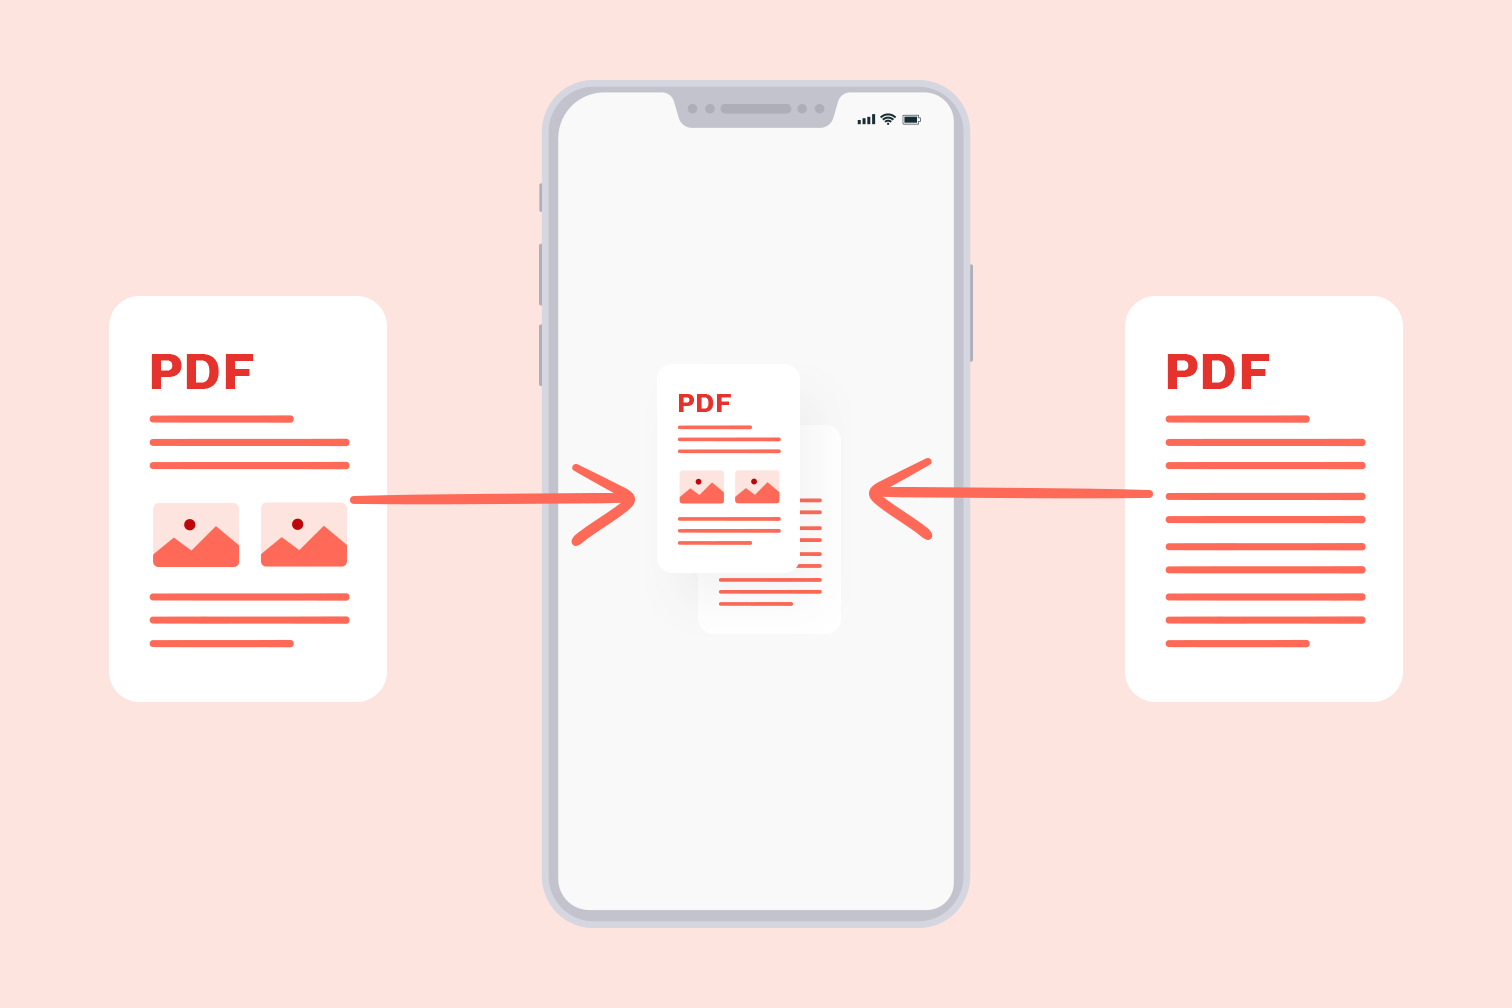 How to merge PDF files on mobile devices